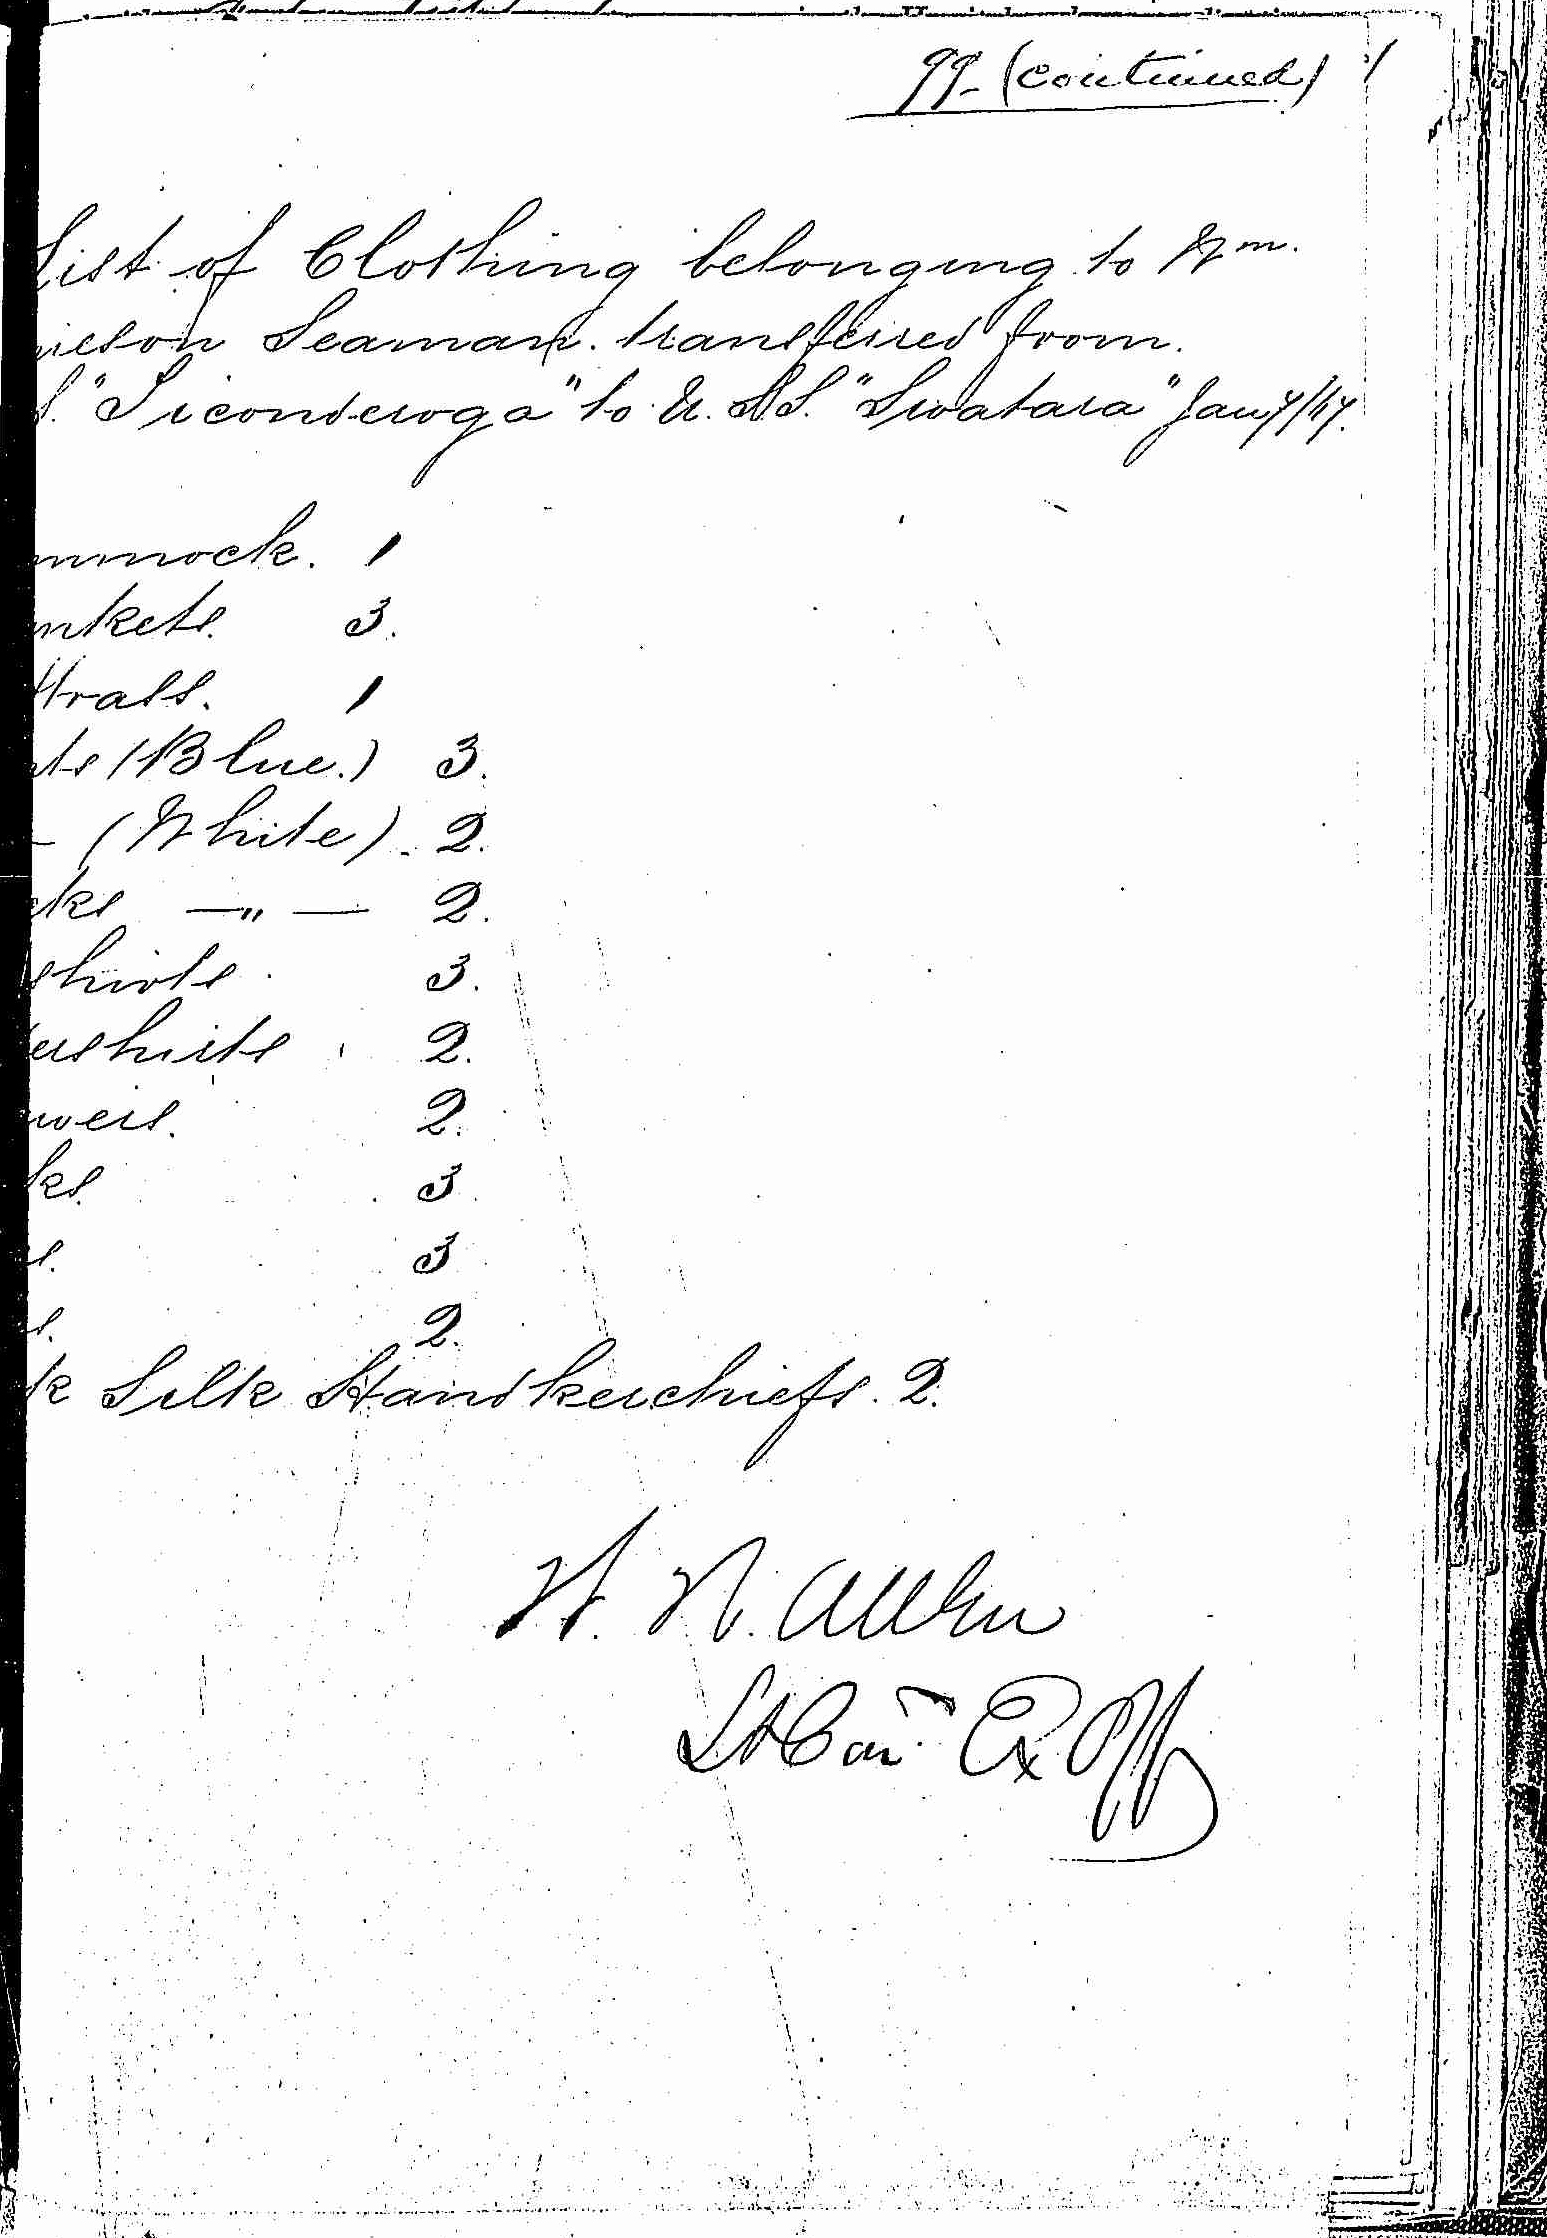 Entry for William Jamison (page 3 of 5) in the log Hospital Tickets and Case Papers - Naval Hospital - Washington, D.C. - 1866-68